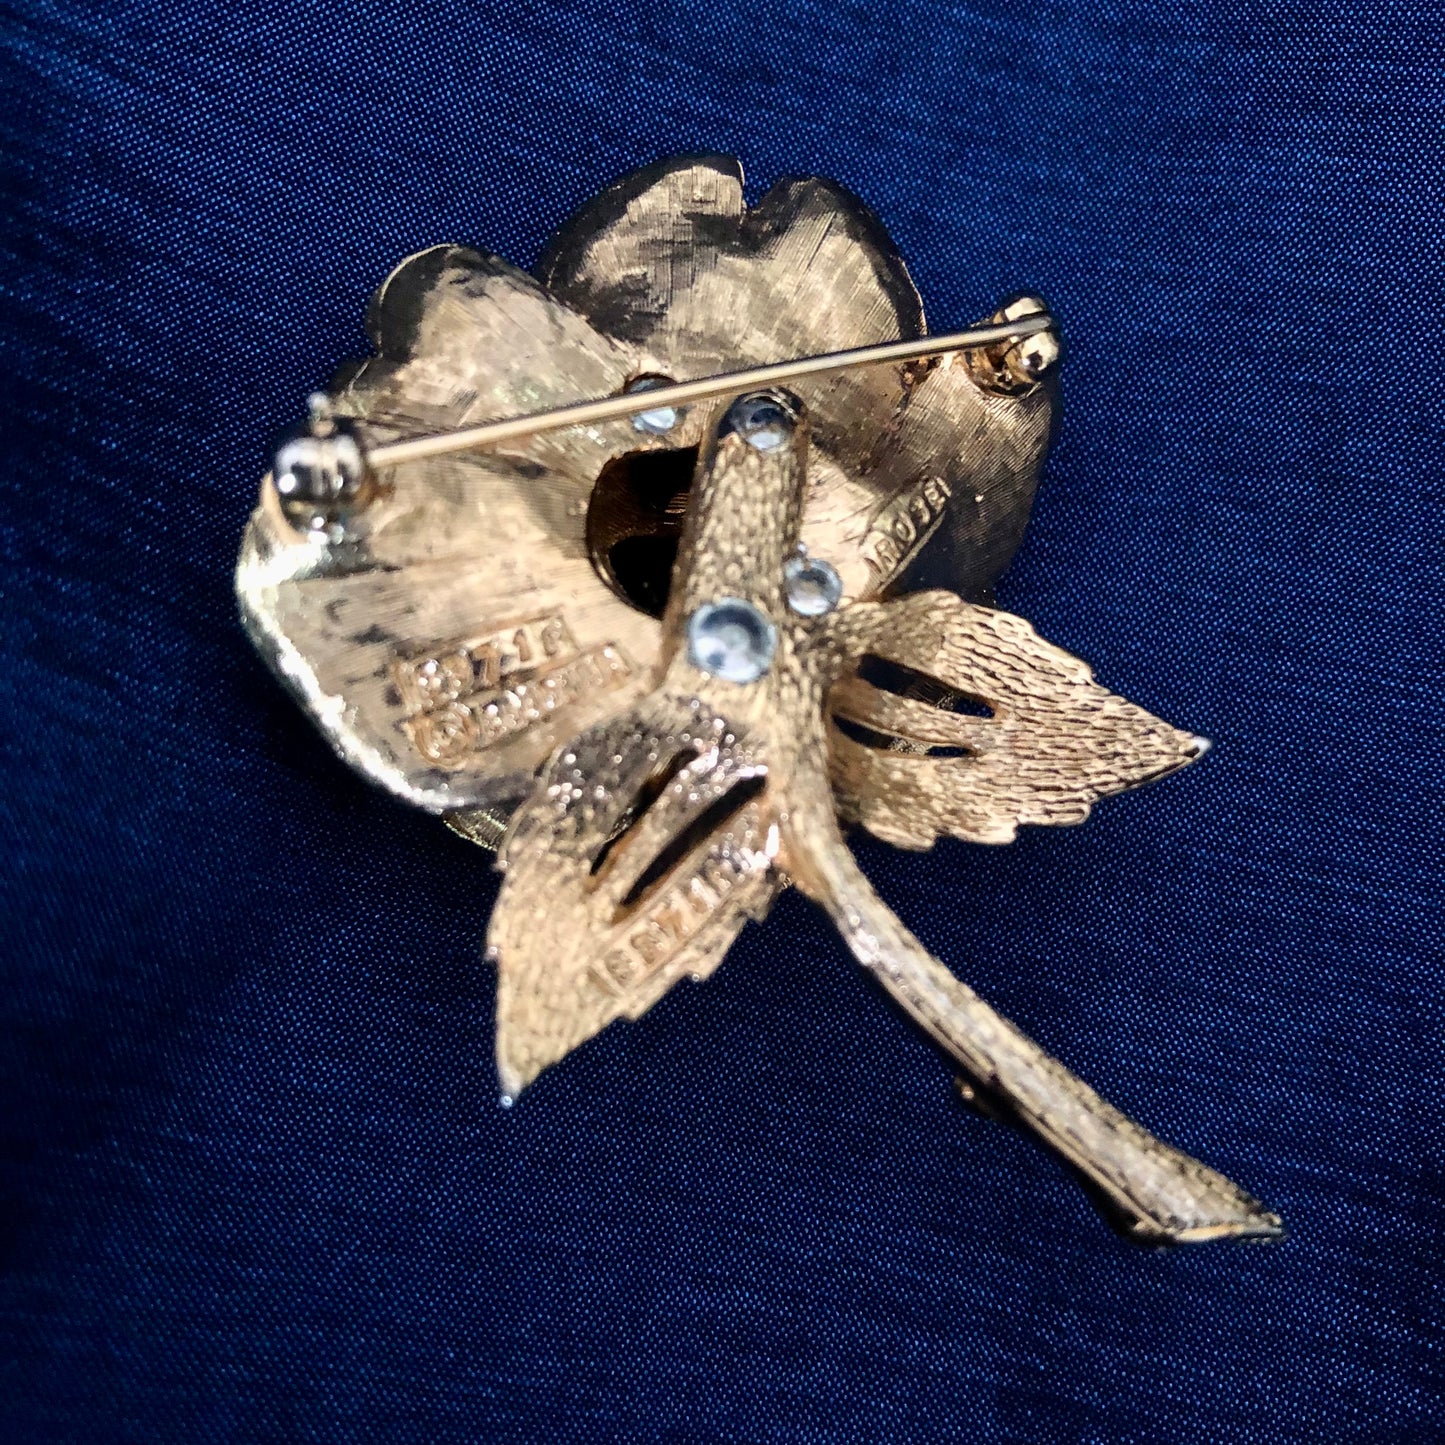 Vintage Rose Pin by Boucher